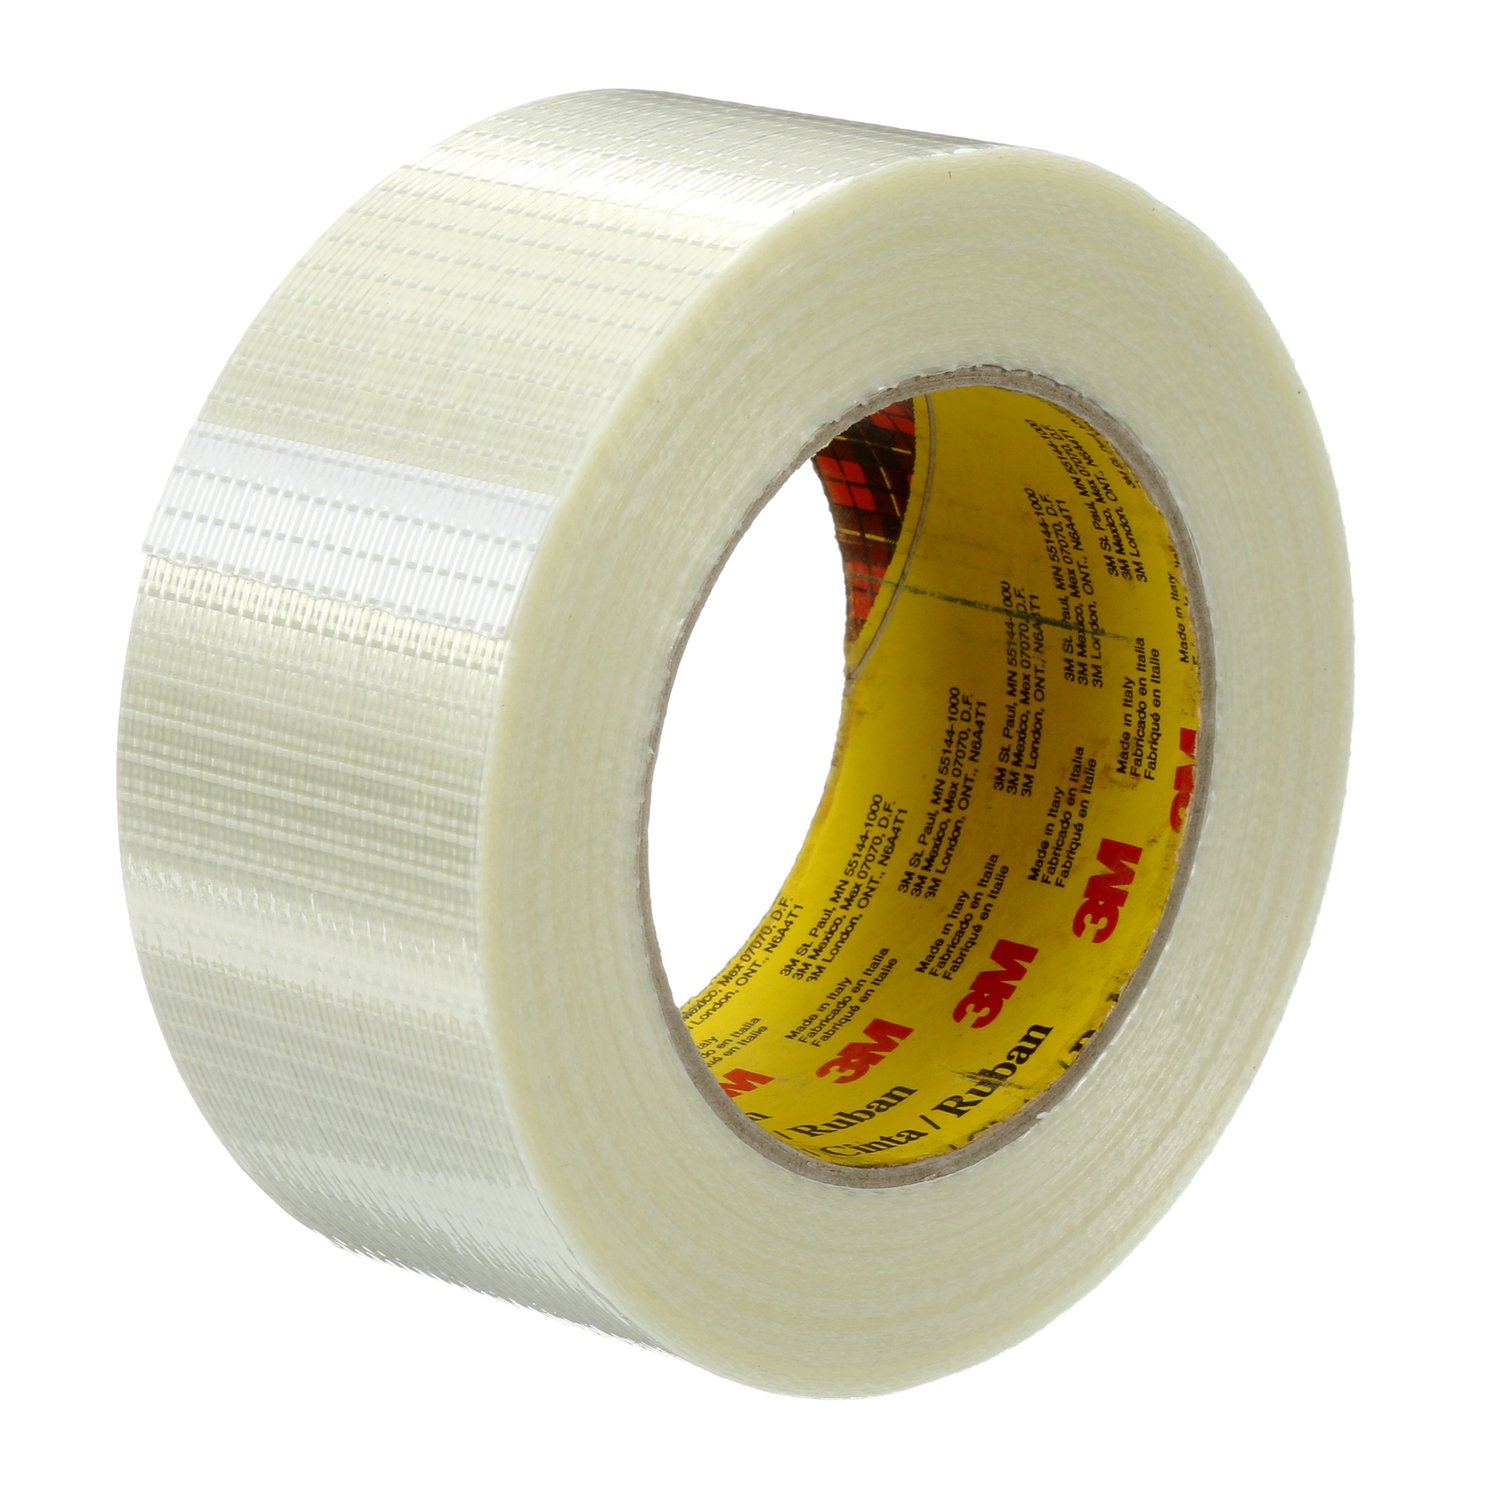 7010375600 - Scotch Bi-Directional Filament Tape 8959, Clear, 50 mm x 50 m, 5.7 mil,
18 rolls/case, Individually Wrapped Conveniently Packaged